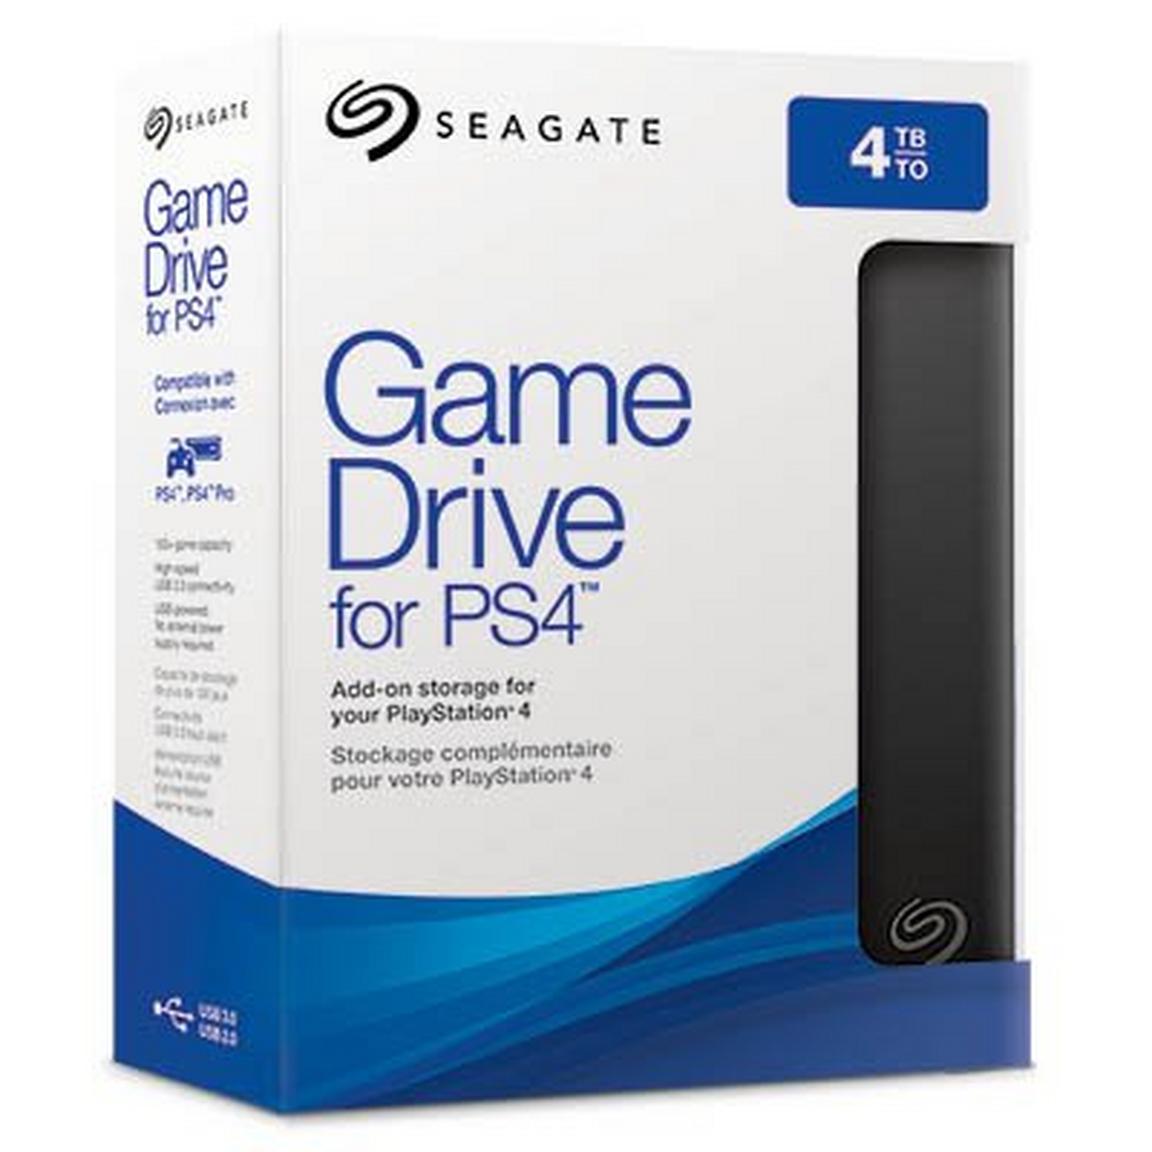 Seagate 4TB External Game Drive, PS4 Brand $69.98